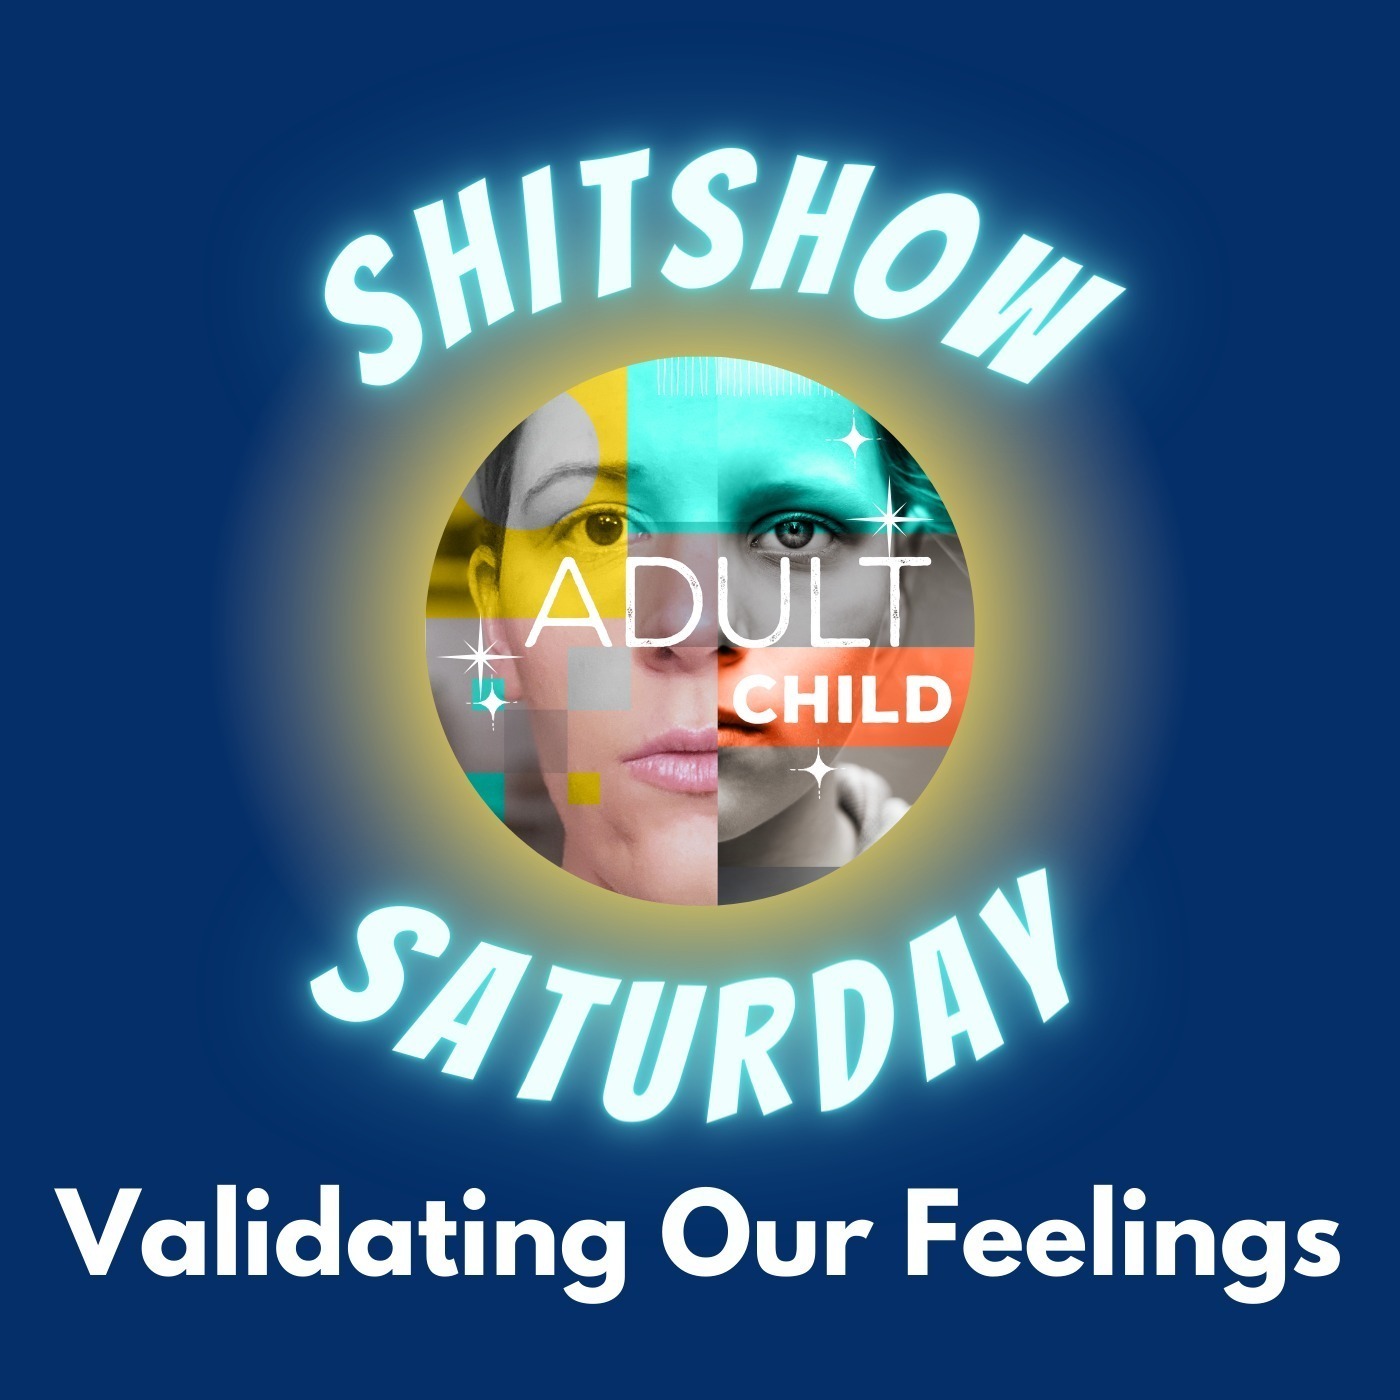 SHITSHOW SATURDAY #97 - Validating Our Feelings